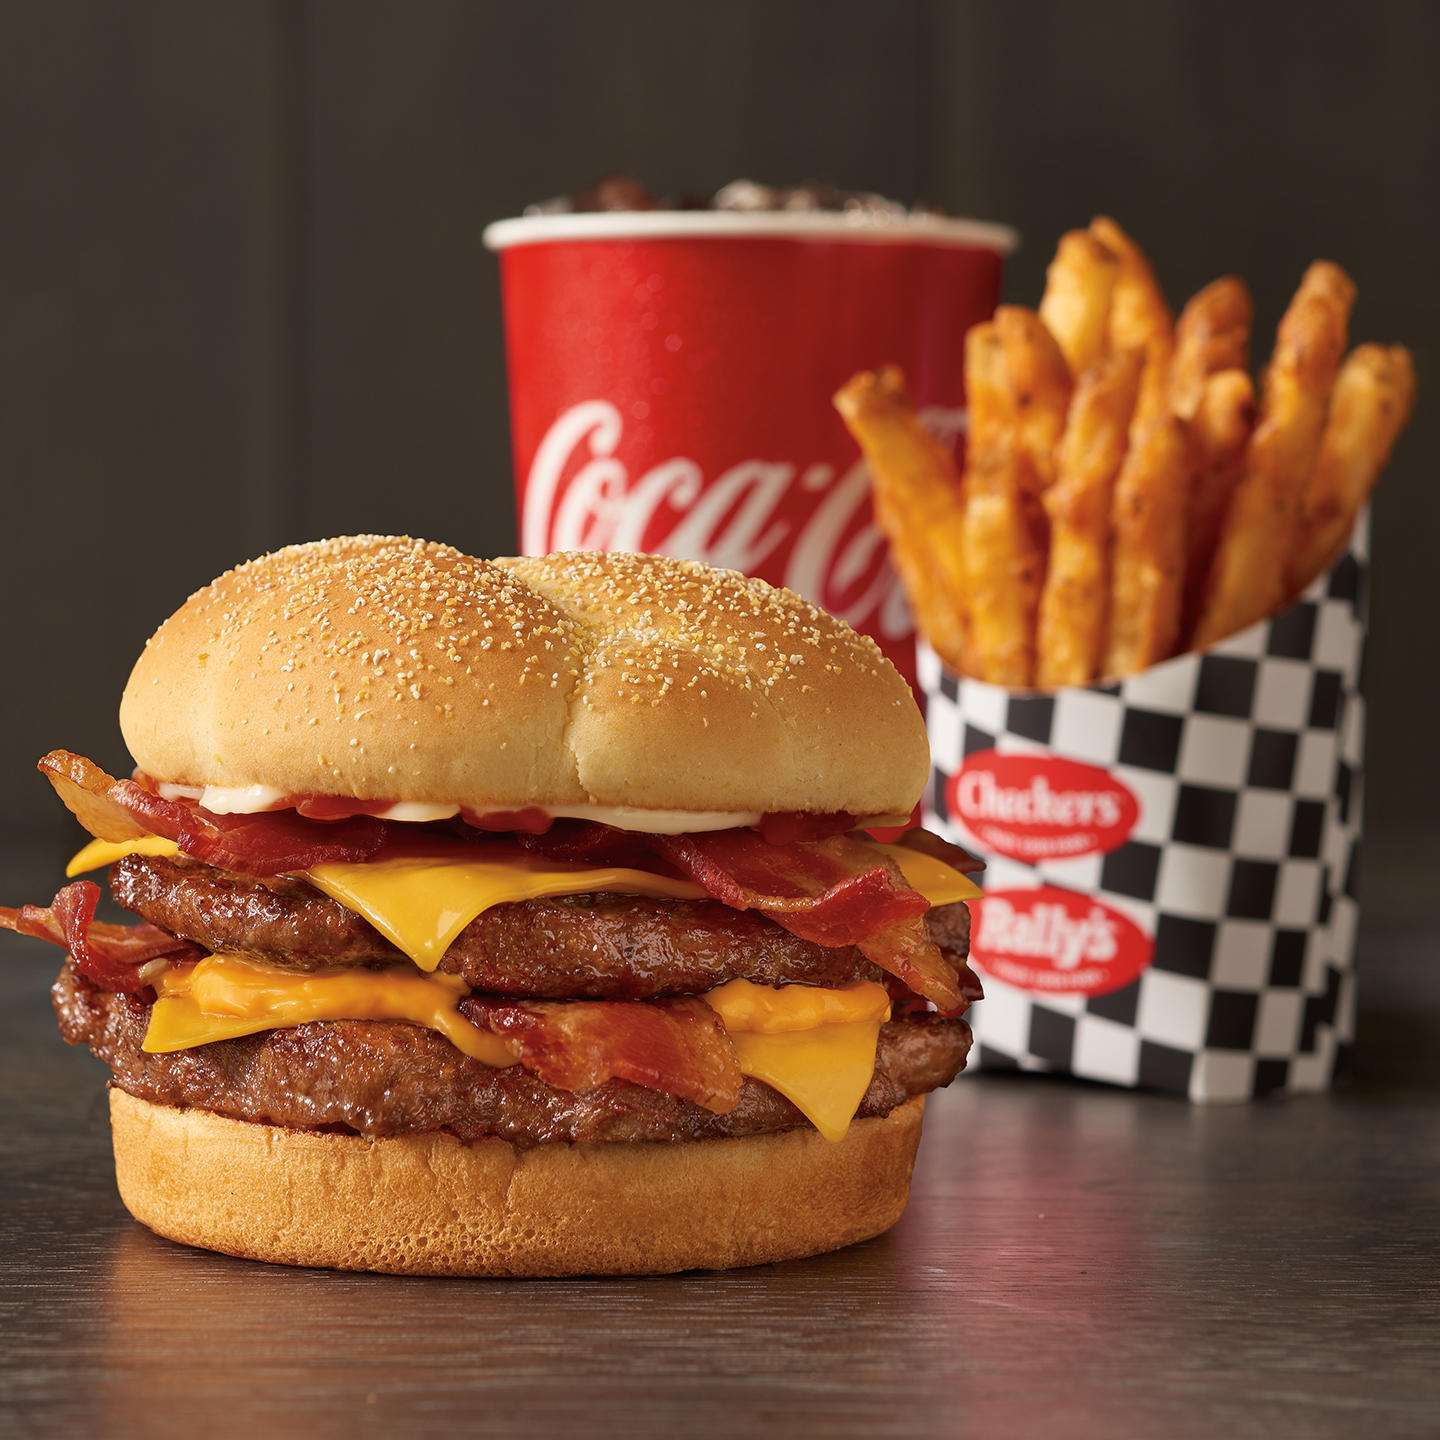 Beef. Cheese. Bacon. Repeat.
Double up on the beef. Triple up on the cheese. And multiply the bacon FOUR TIMES. That’s a towering burger stacked with flavor.